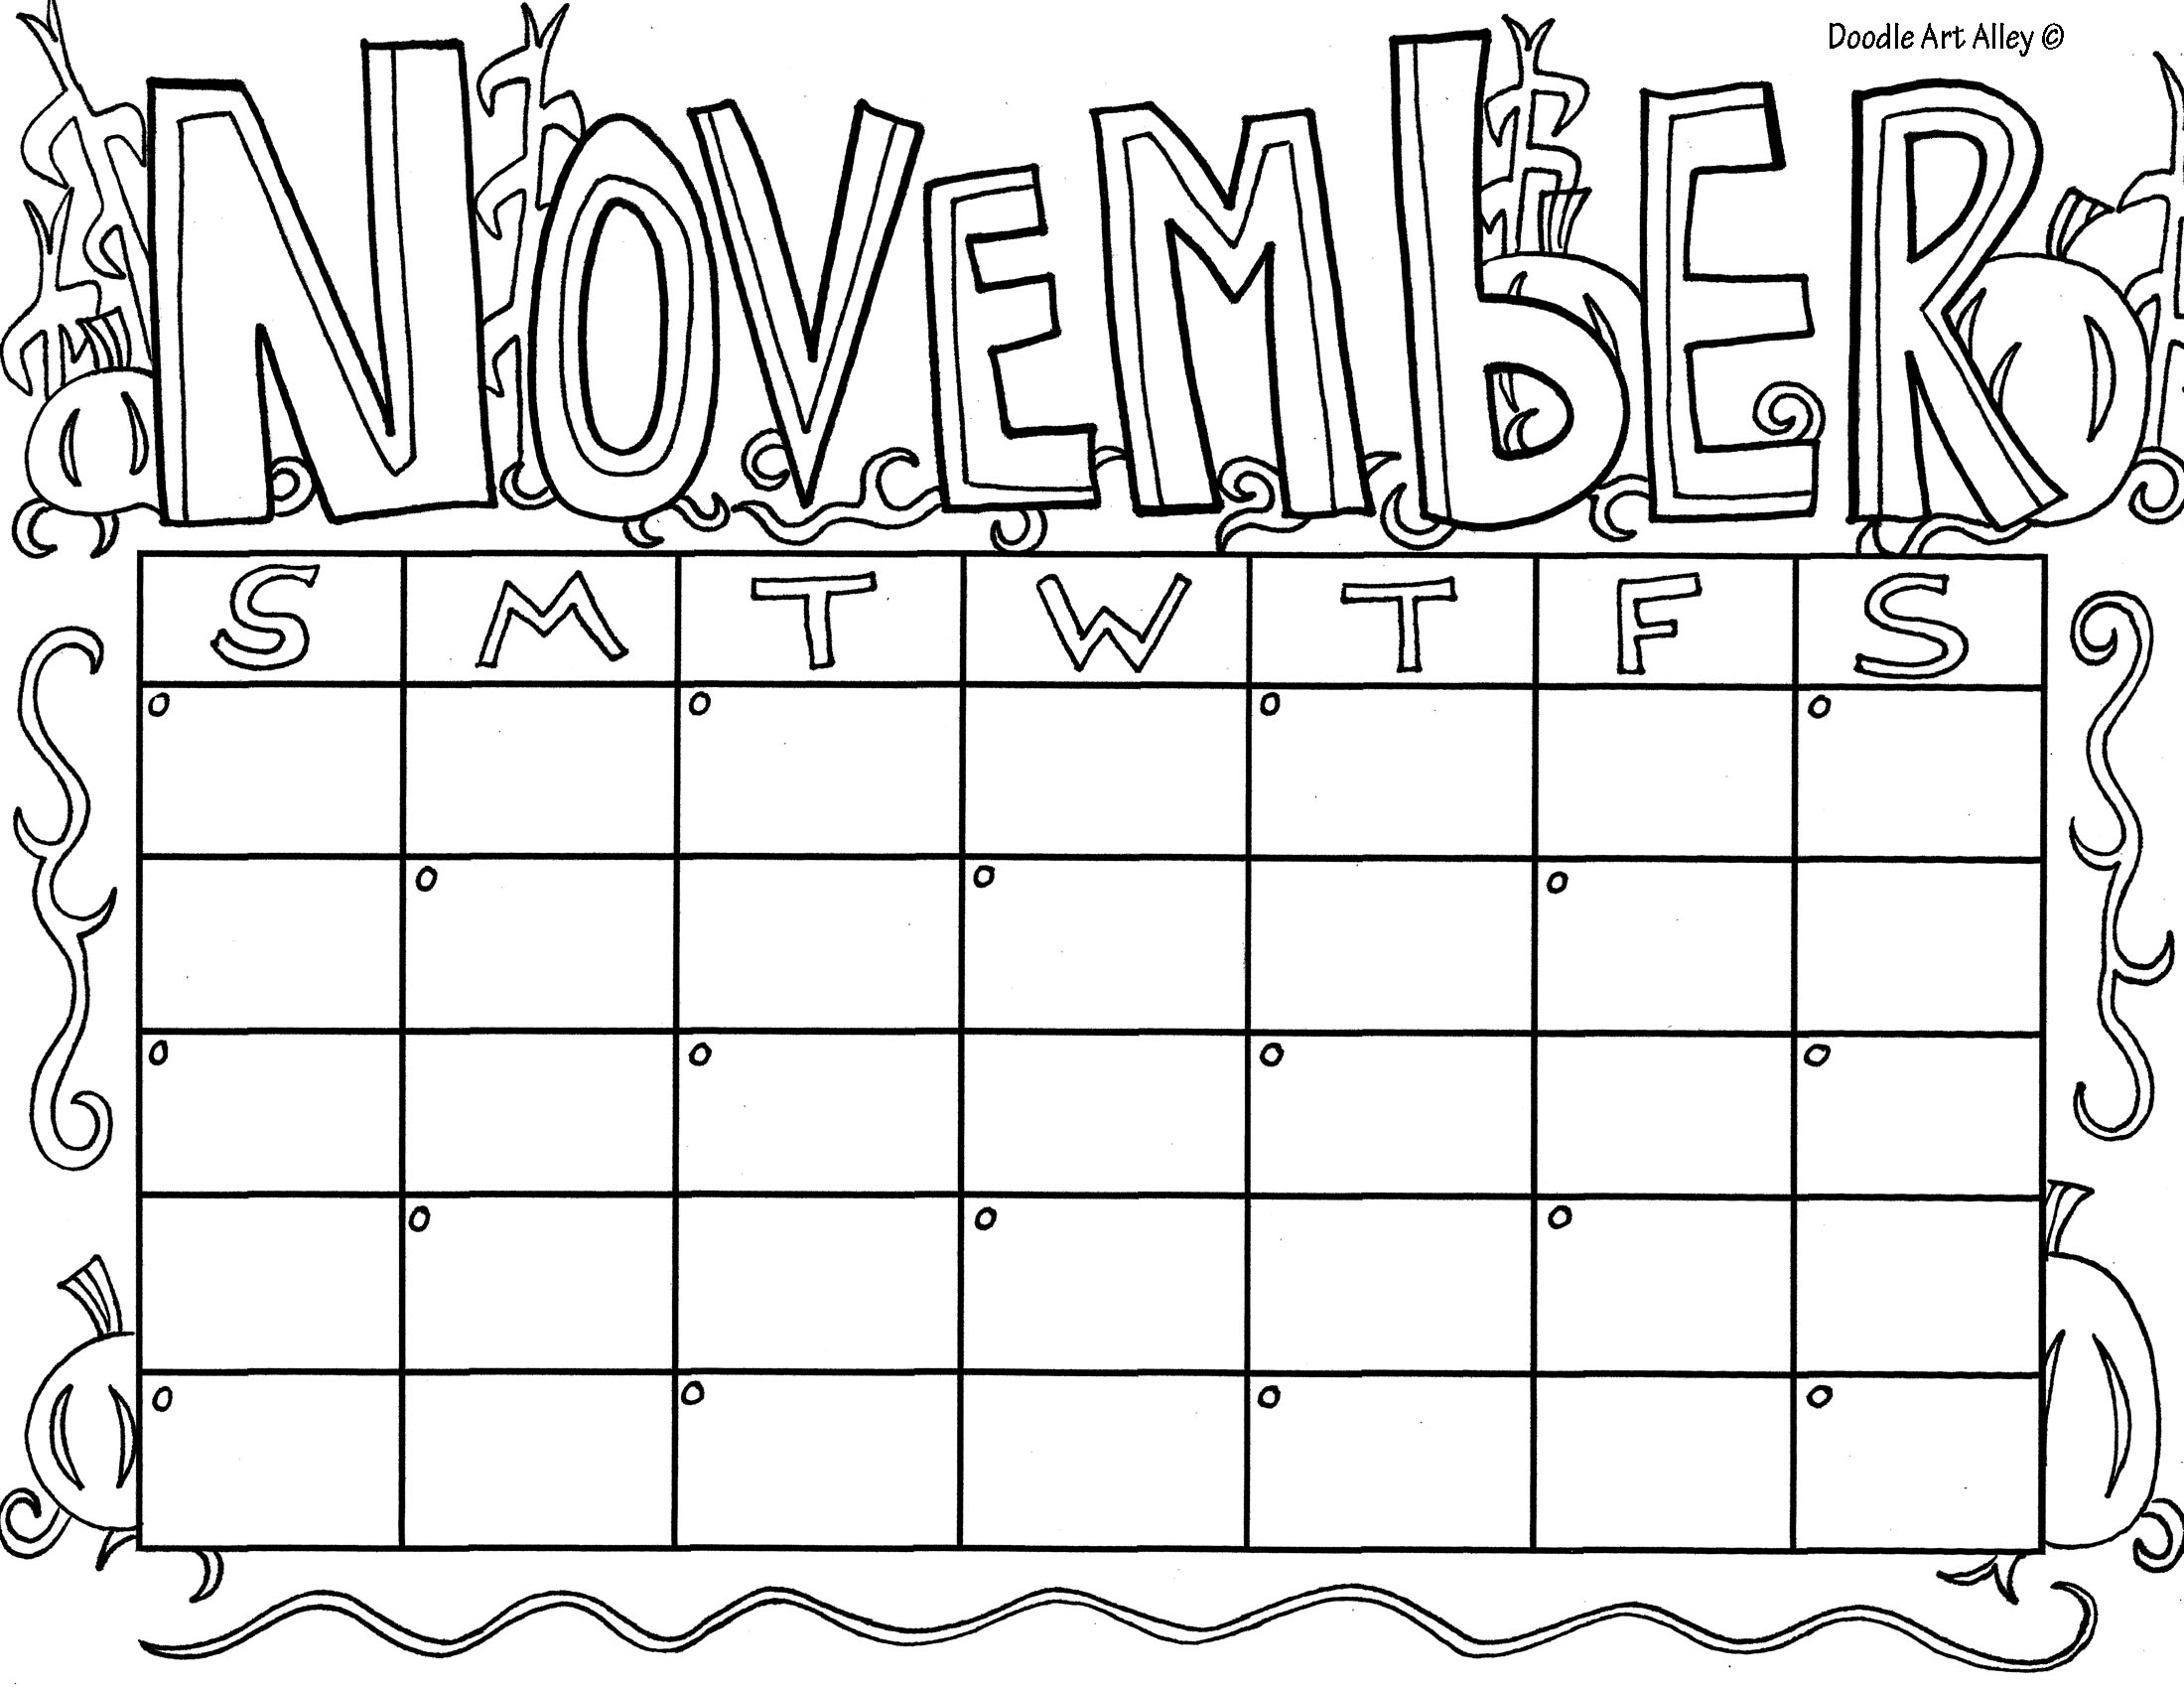 November Coloring Pages DOODLE ART ALLEY